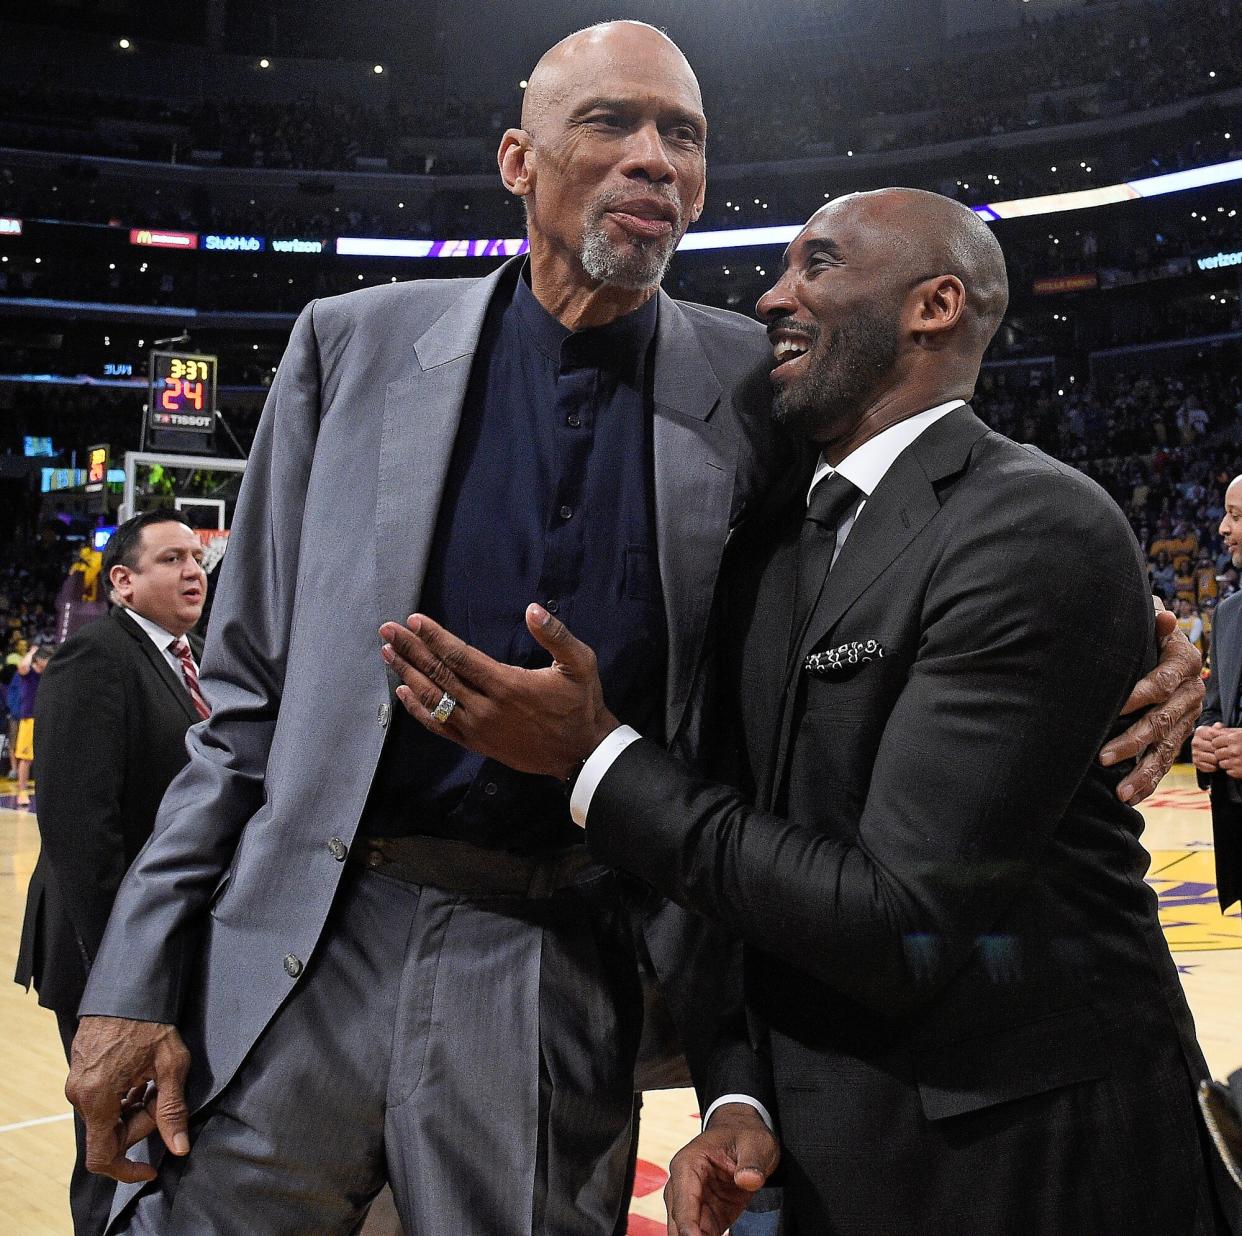 Kobe Bryant and Kareem Abdul-Jabbar shshare a moment at halftime after both of Bryant's #8 and #24 Los Angeles Lakers jerseys are retired at Staples Center on December 18, 2017 in Los Angeles, California.